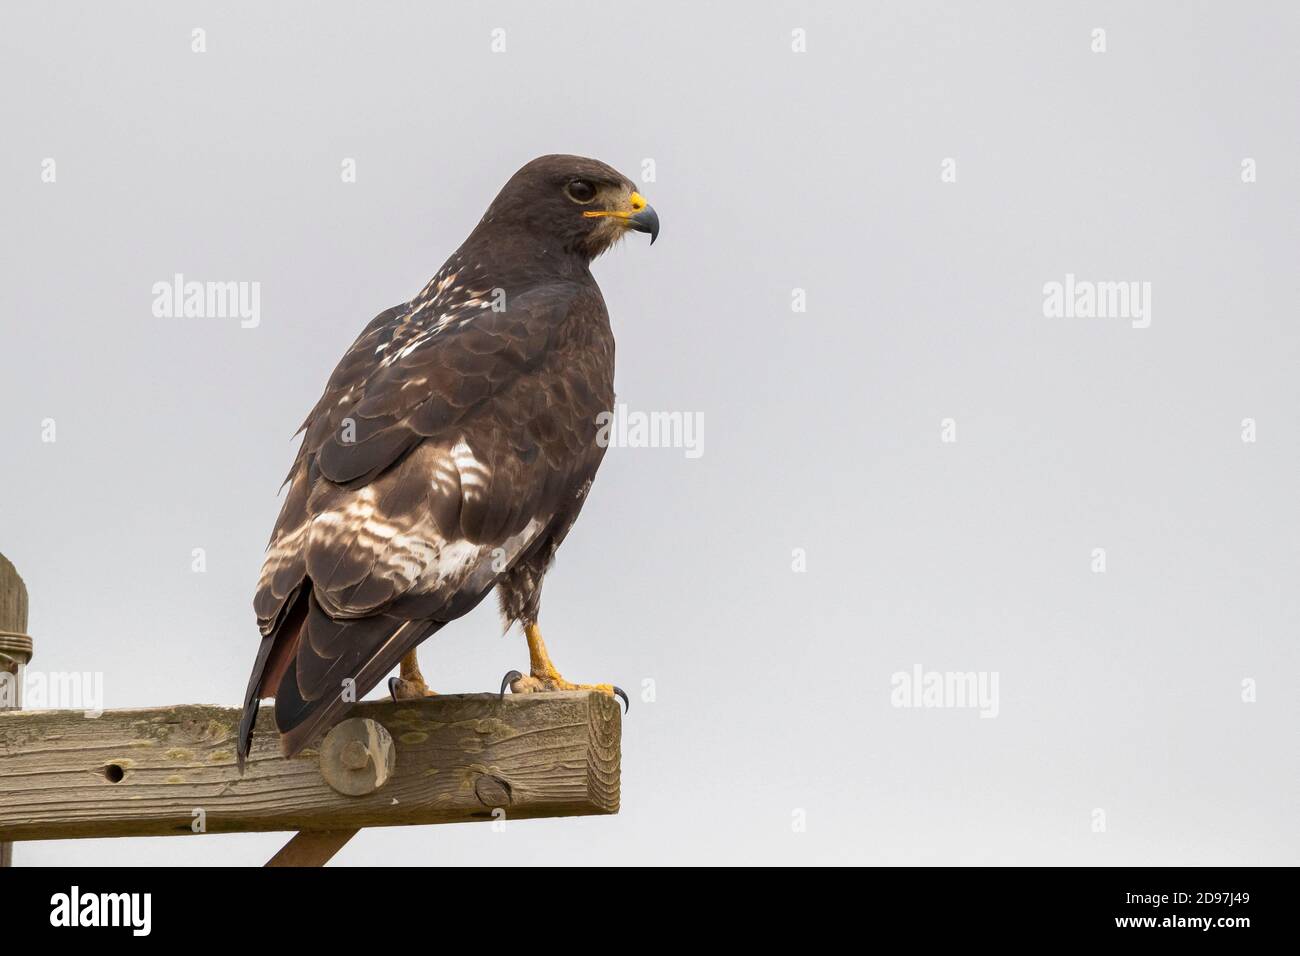 Jackal Buzzard (Buteo rufofuscus), adult perched on a post seen from the back, Western Cape, South Africa Stock Photo